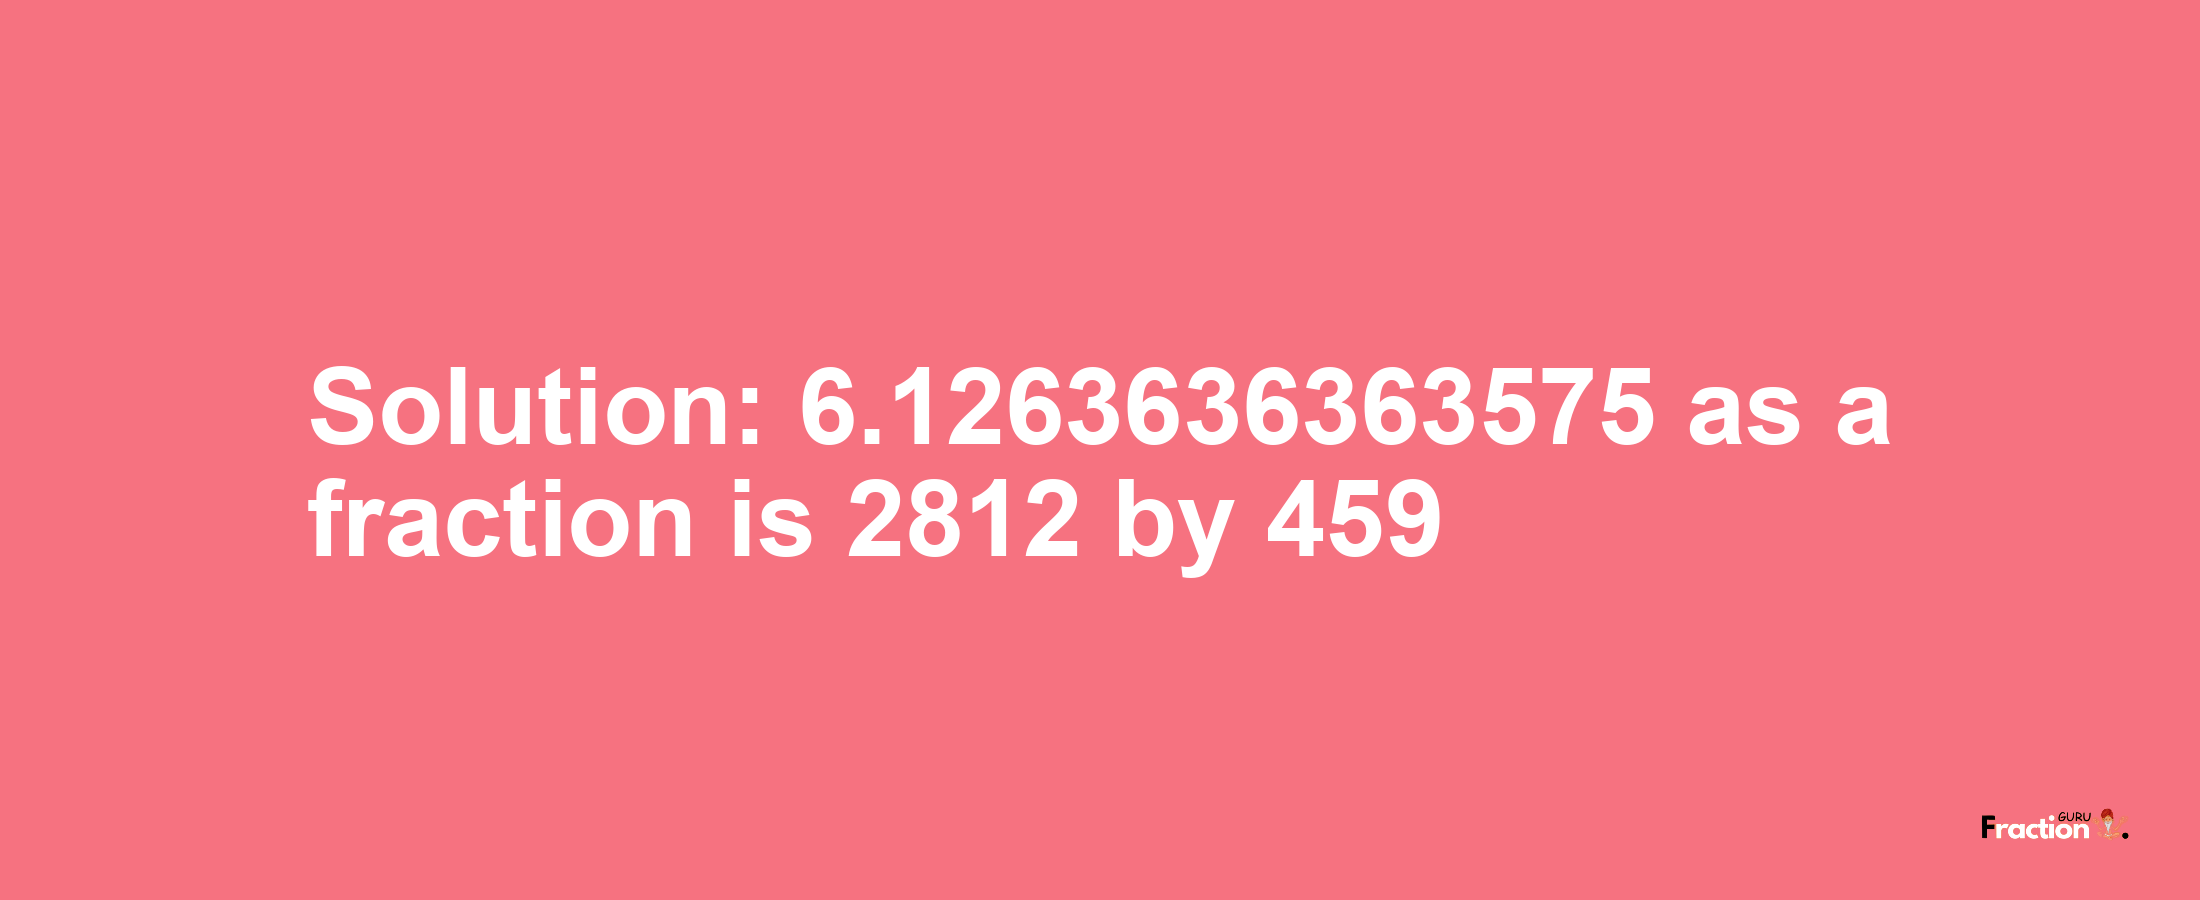 Solution:6.1263636363575 as a fraction is 2812/459